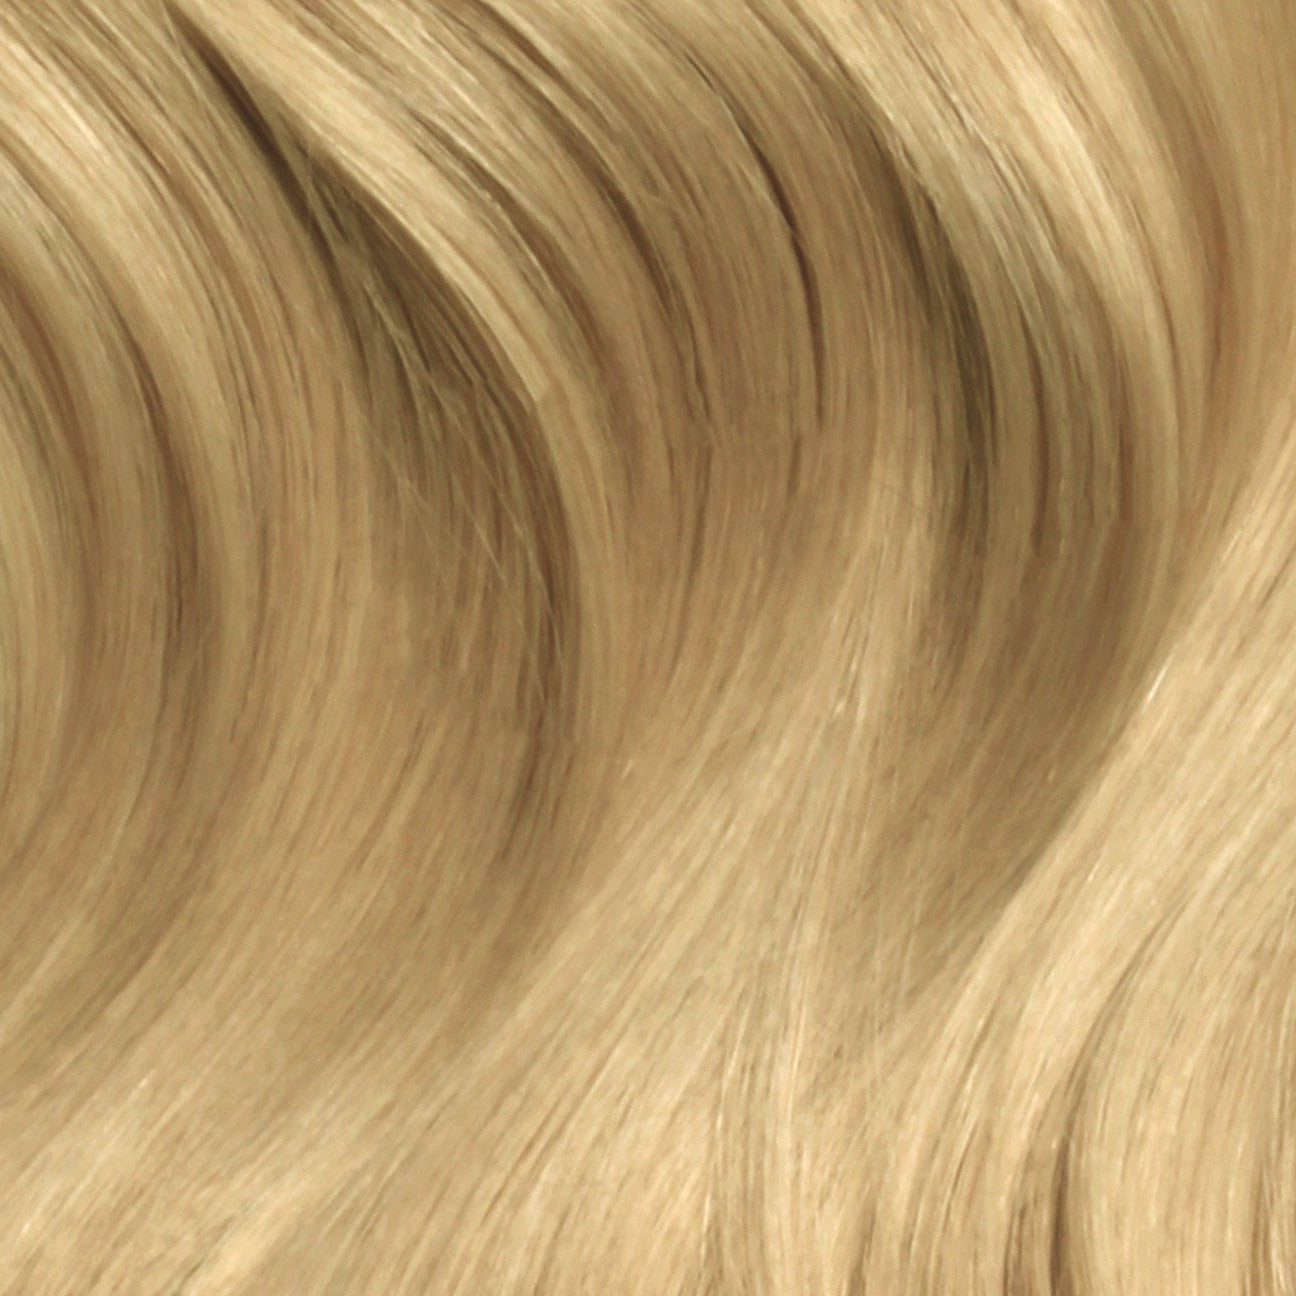 Nano Bonds 20 Inches - SWAY Hair Extensions Hollywood-Blonde-18-613 Ultra-fine, invisible bonds for a flawless, natural look. 100% Remy Human hair, lightweight and versatile. Reusable and perfect for individual or salon use.